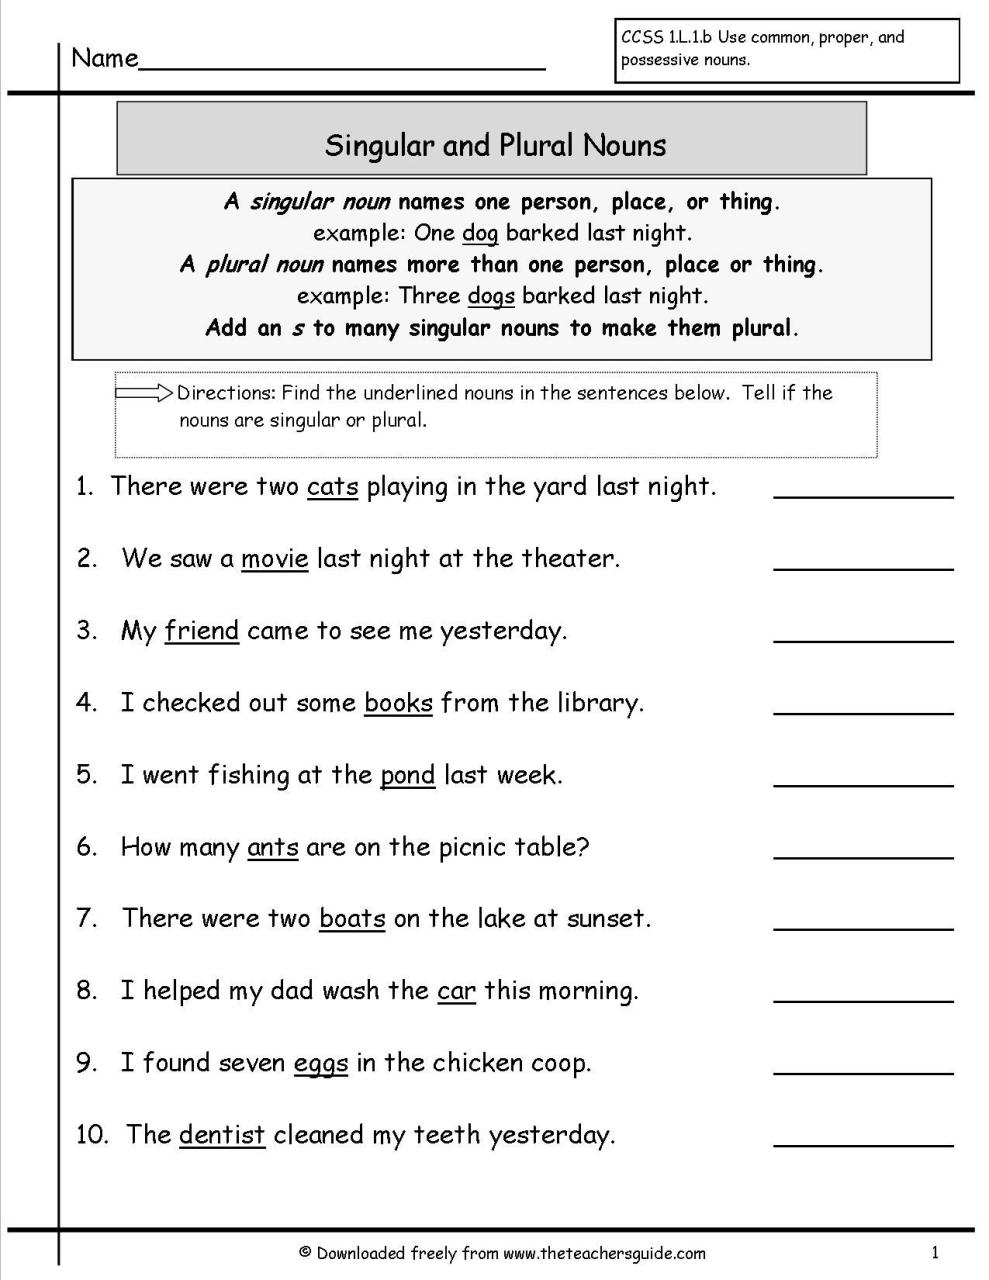 Handwriting Worksheets For Adults